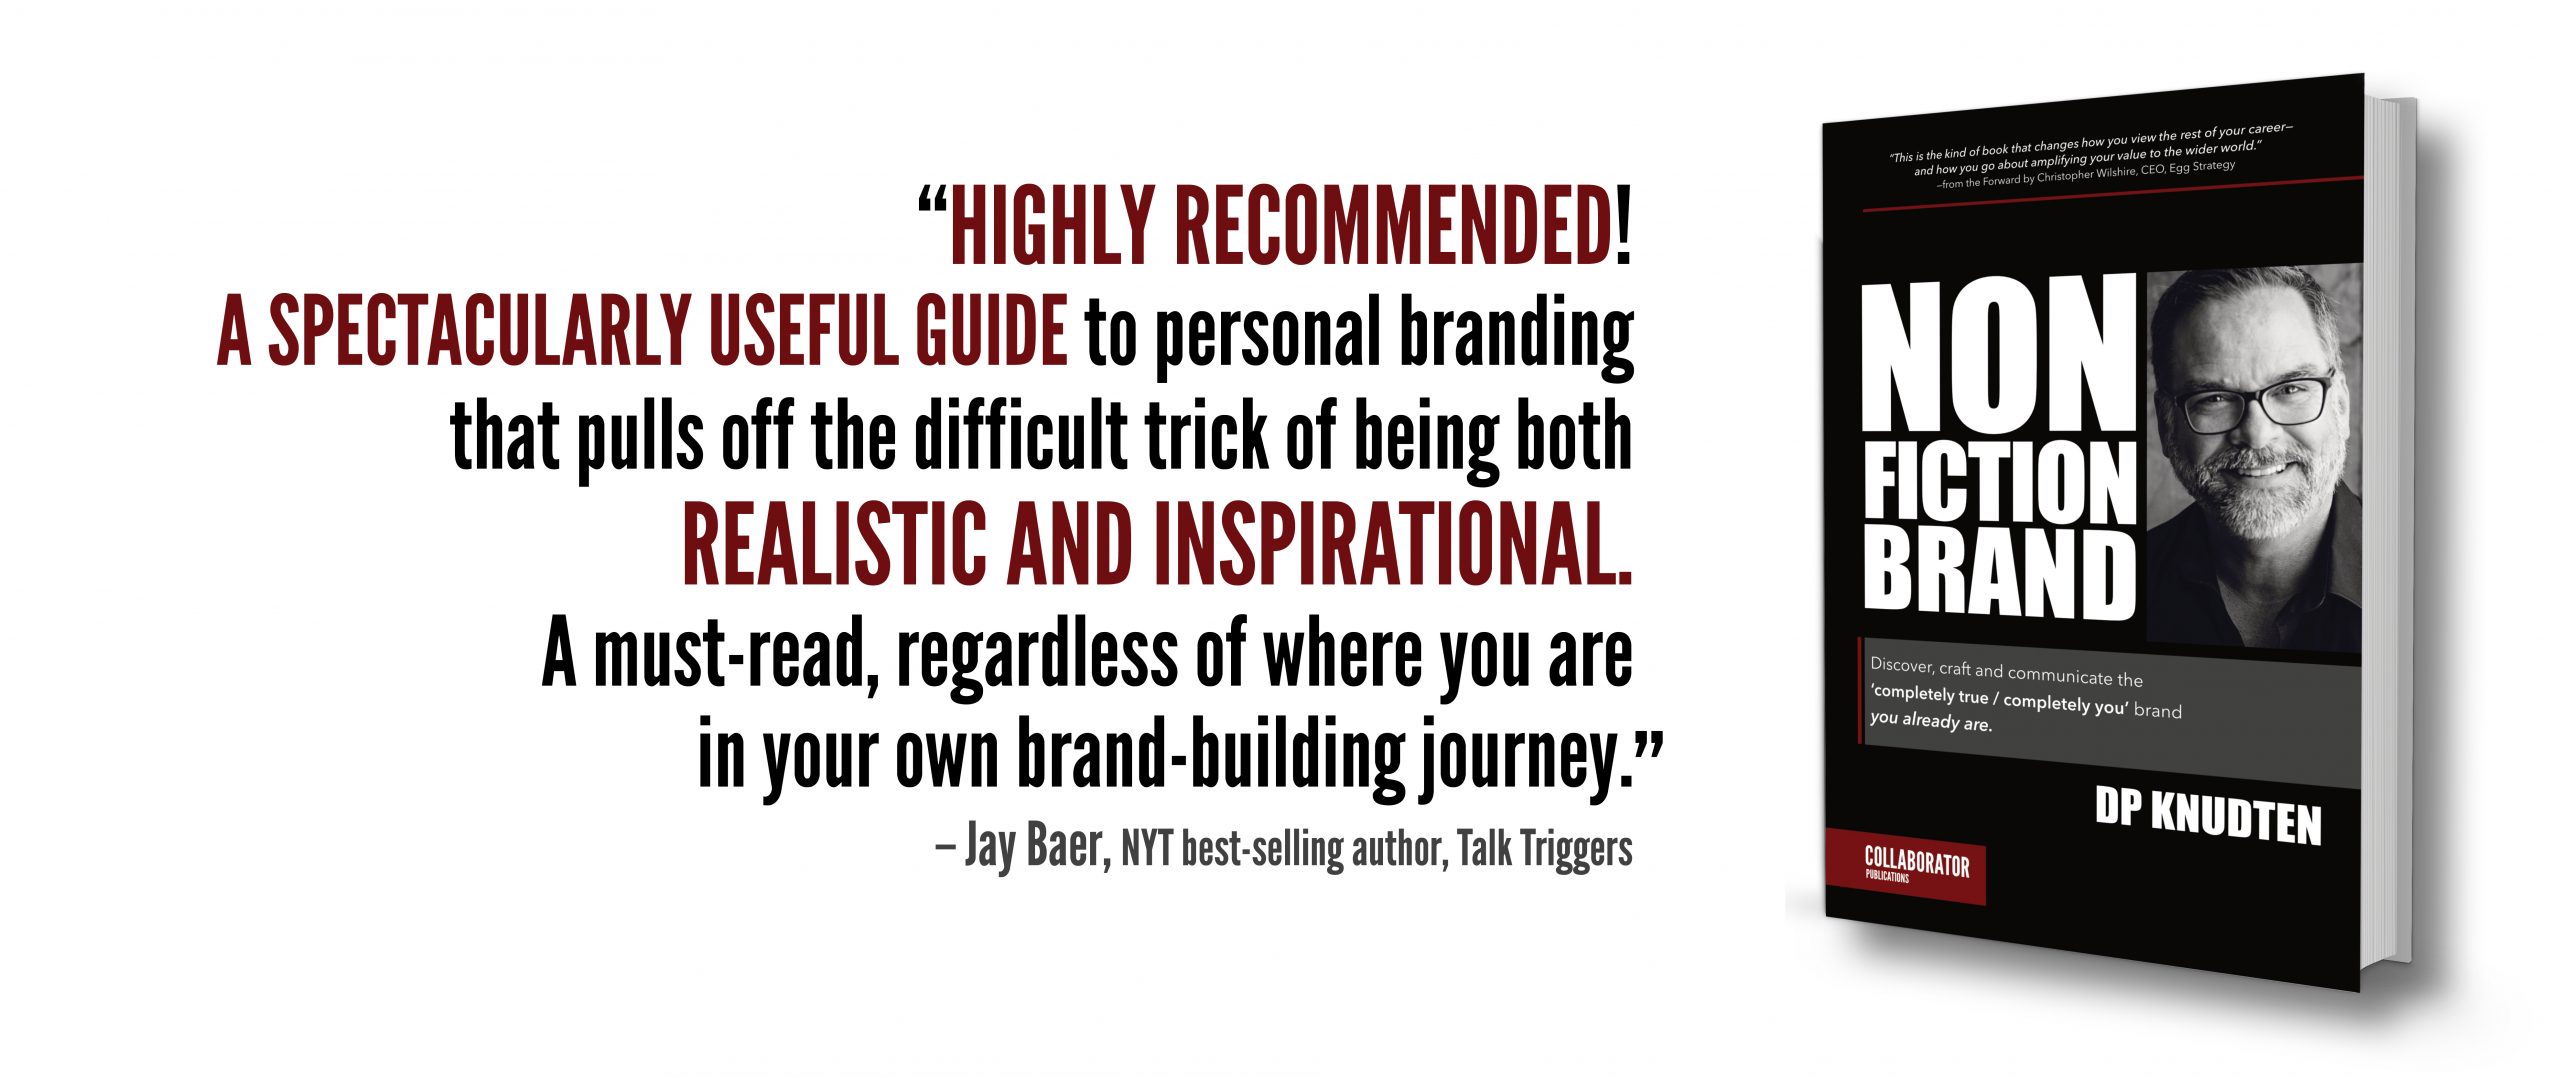 Jay Baer's NONFICTION BRAND book blurb: “Highly recommended! A spectacularly useful guide to personal branding that pulls off the difficult trick of being both realistic AND inspirational. A must-read, regardless of where you are in your own brand-building journey.”